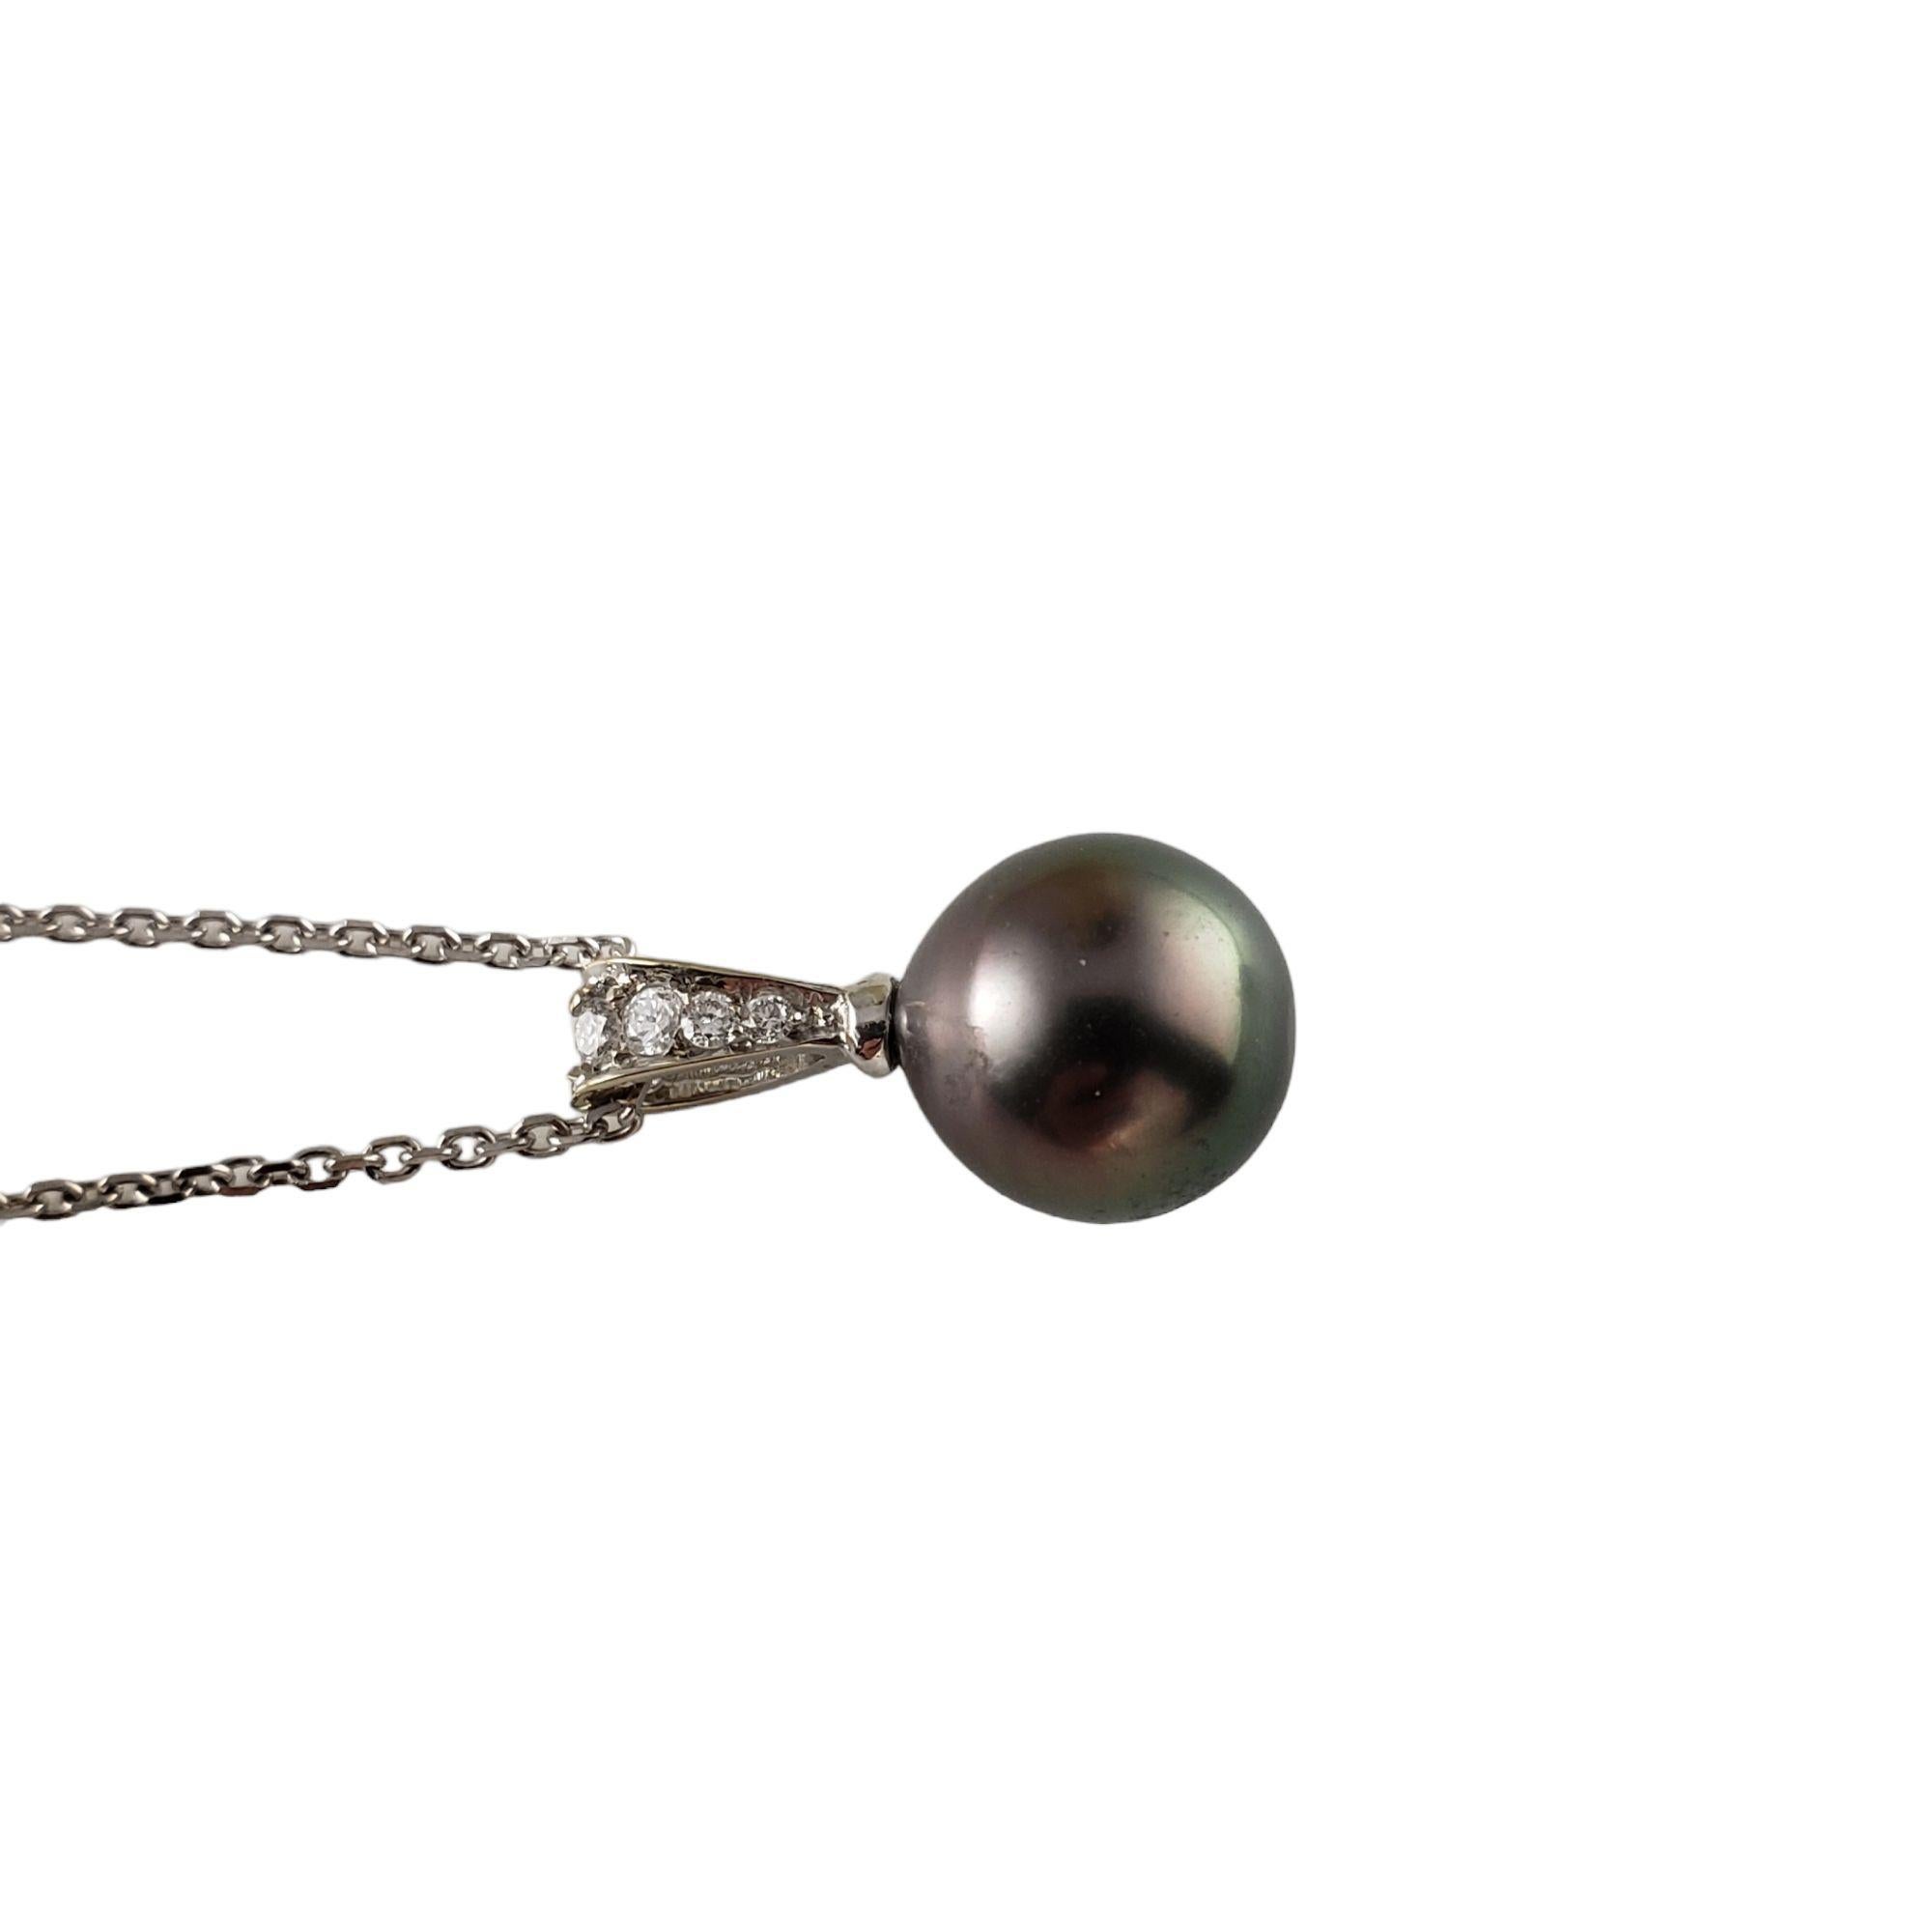 18K/14K White Gold and Diamond Black Pearl Pendant Necklace #14139 In Good Condition For Sale In Washington Depot, CT